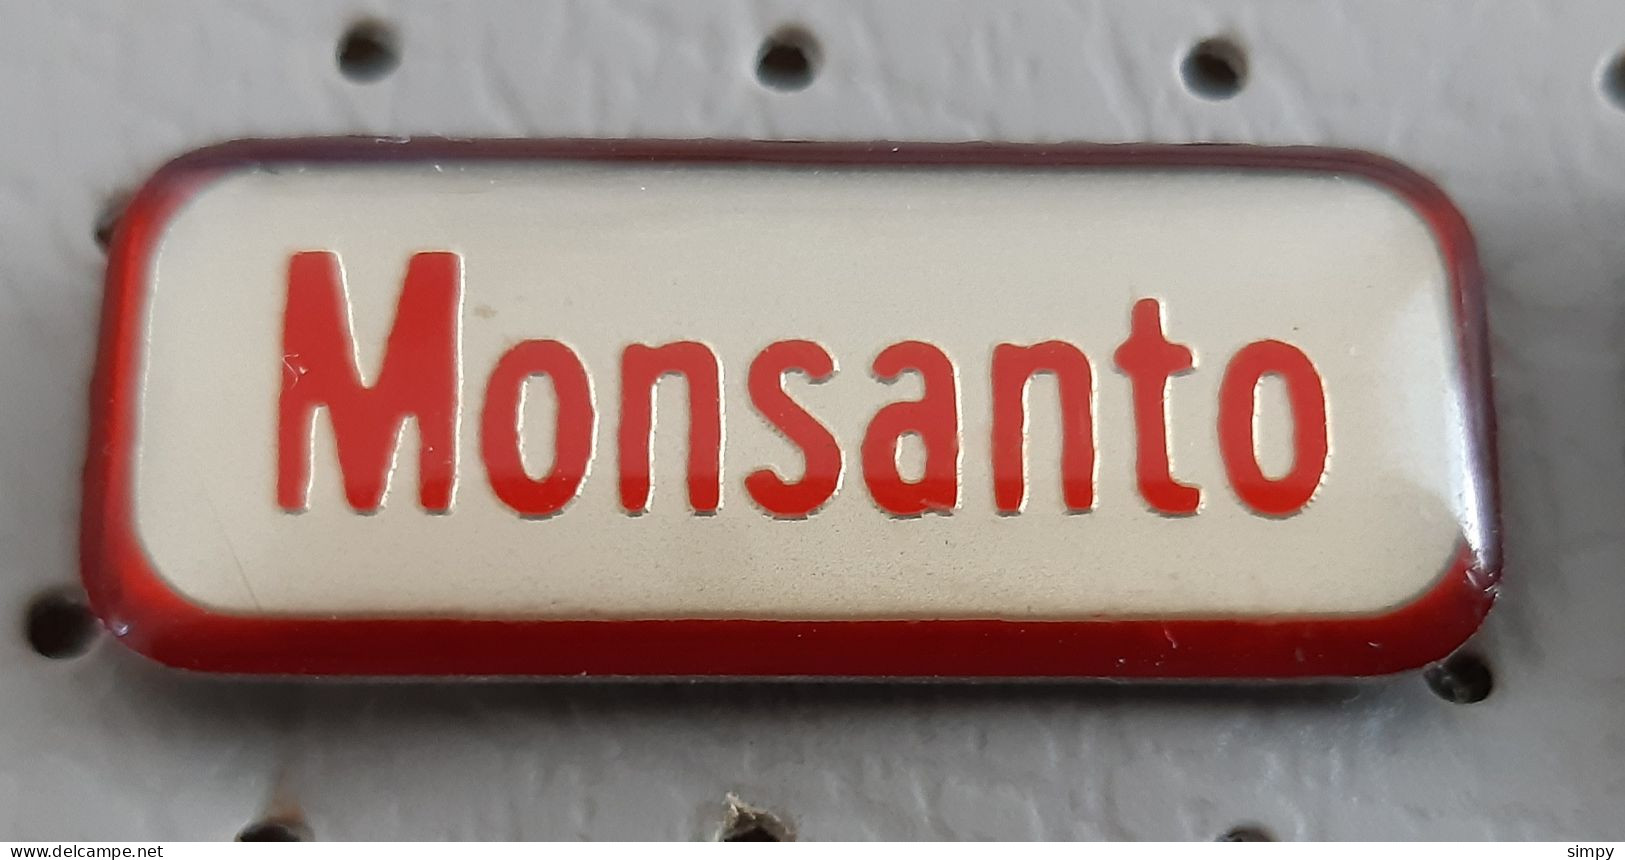 MONSANTO Herbicide Pesticide Agrochemical Agriculture Farming, Chemical  Industry Pin - Trademarks